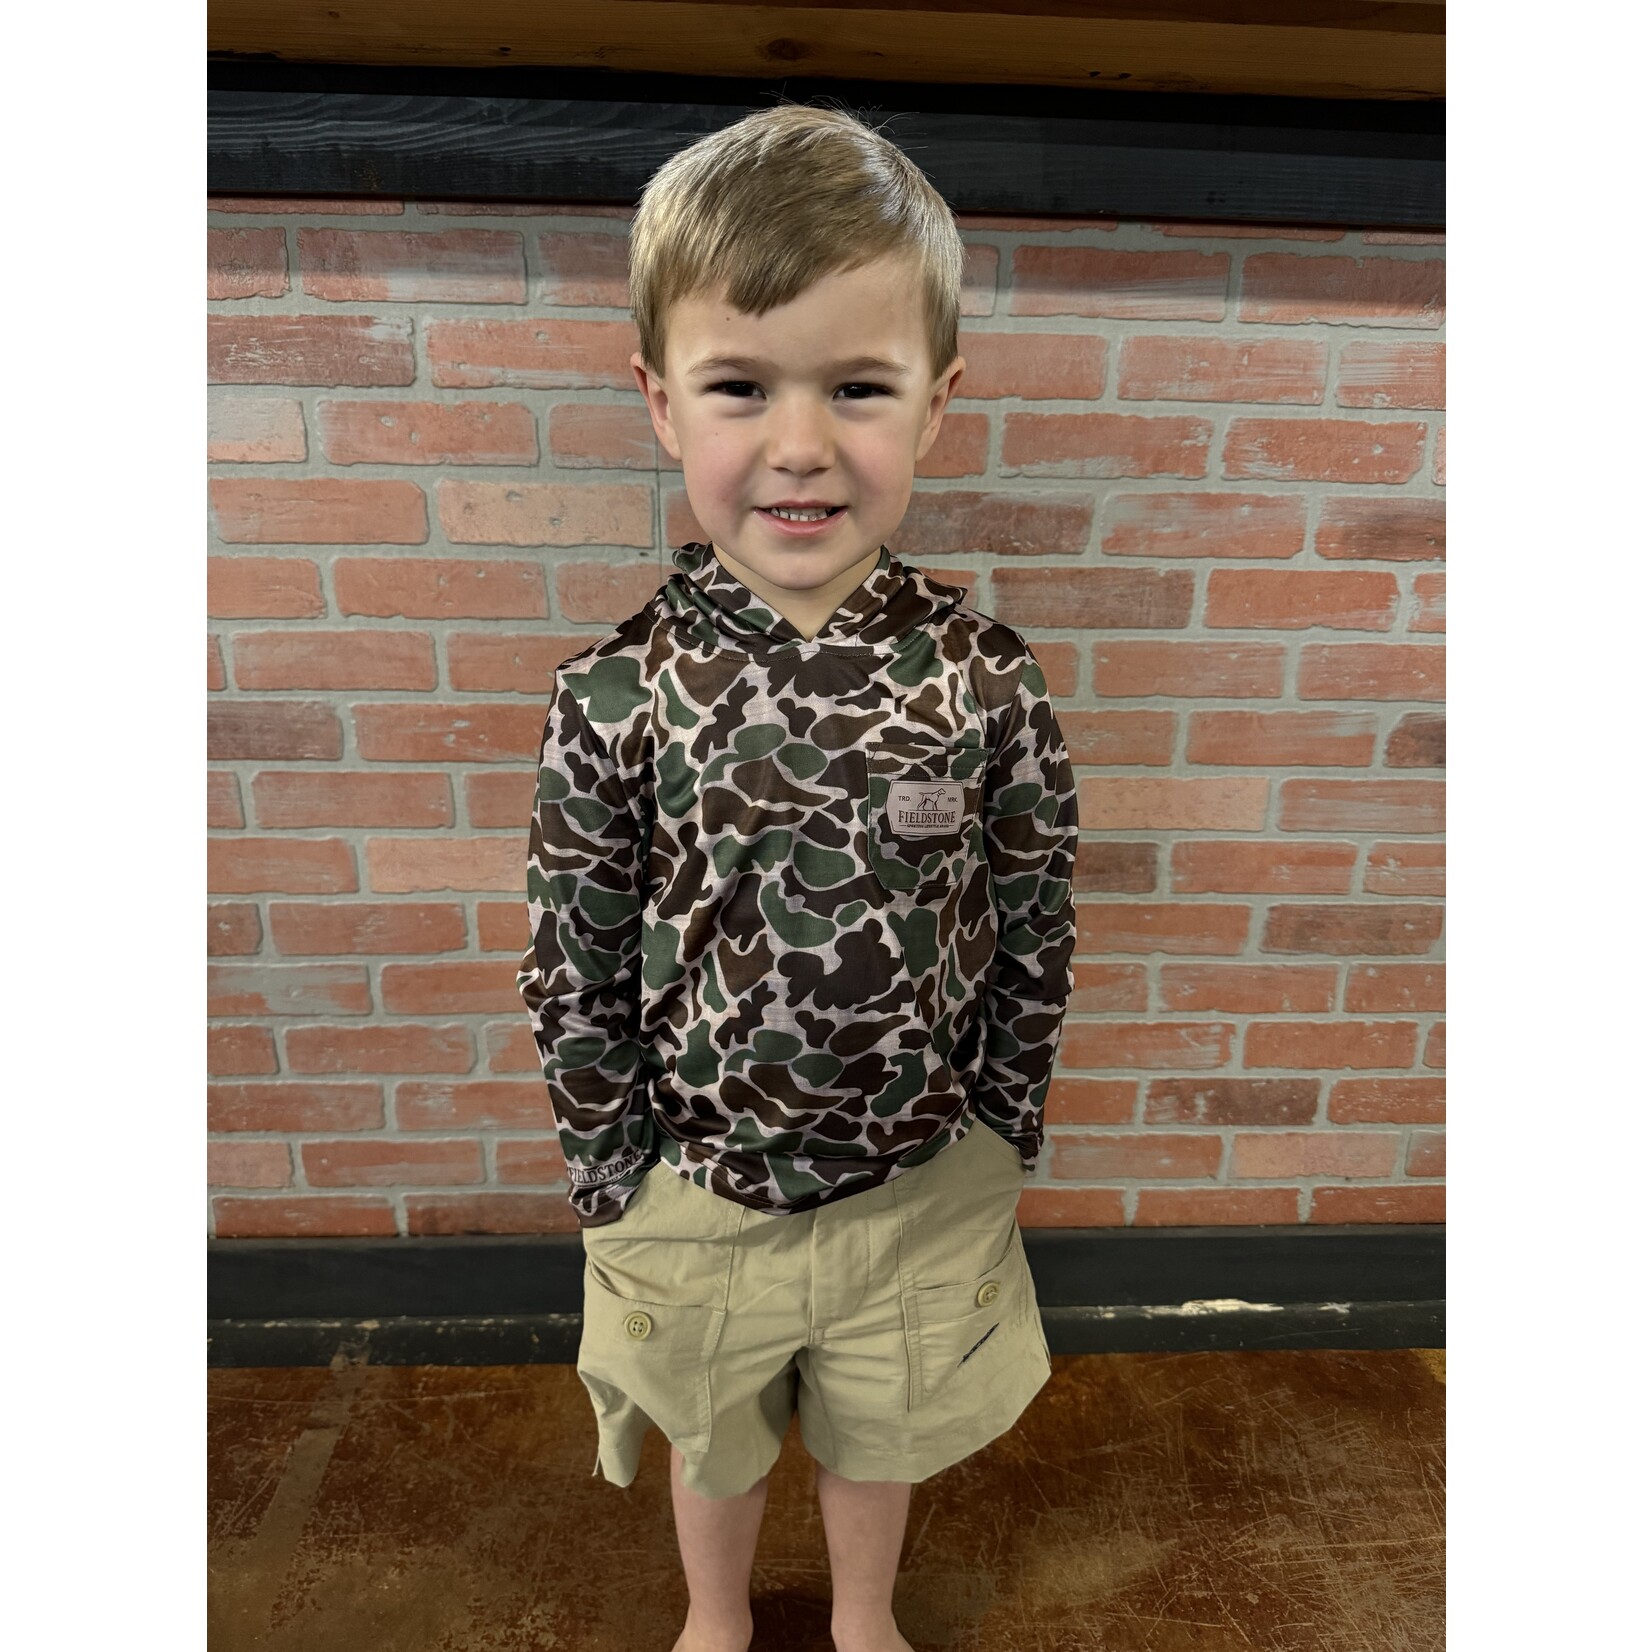 Fieldstone Fieldstone Apparel Youth Dry Fit Camo Light Weight Hooded Performance L/S Shirt